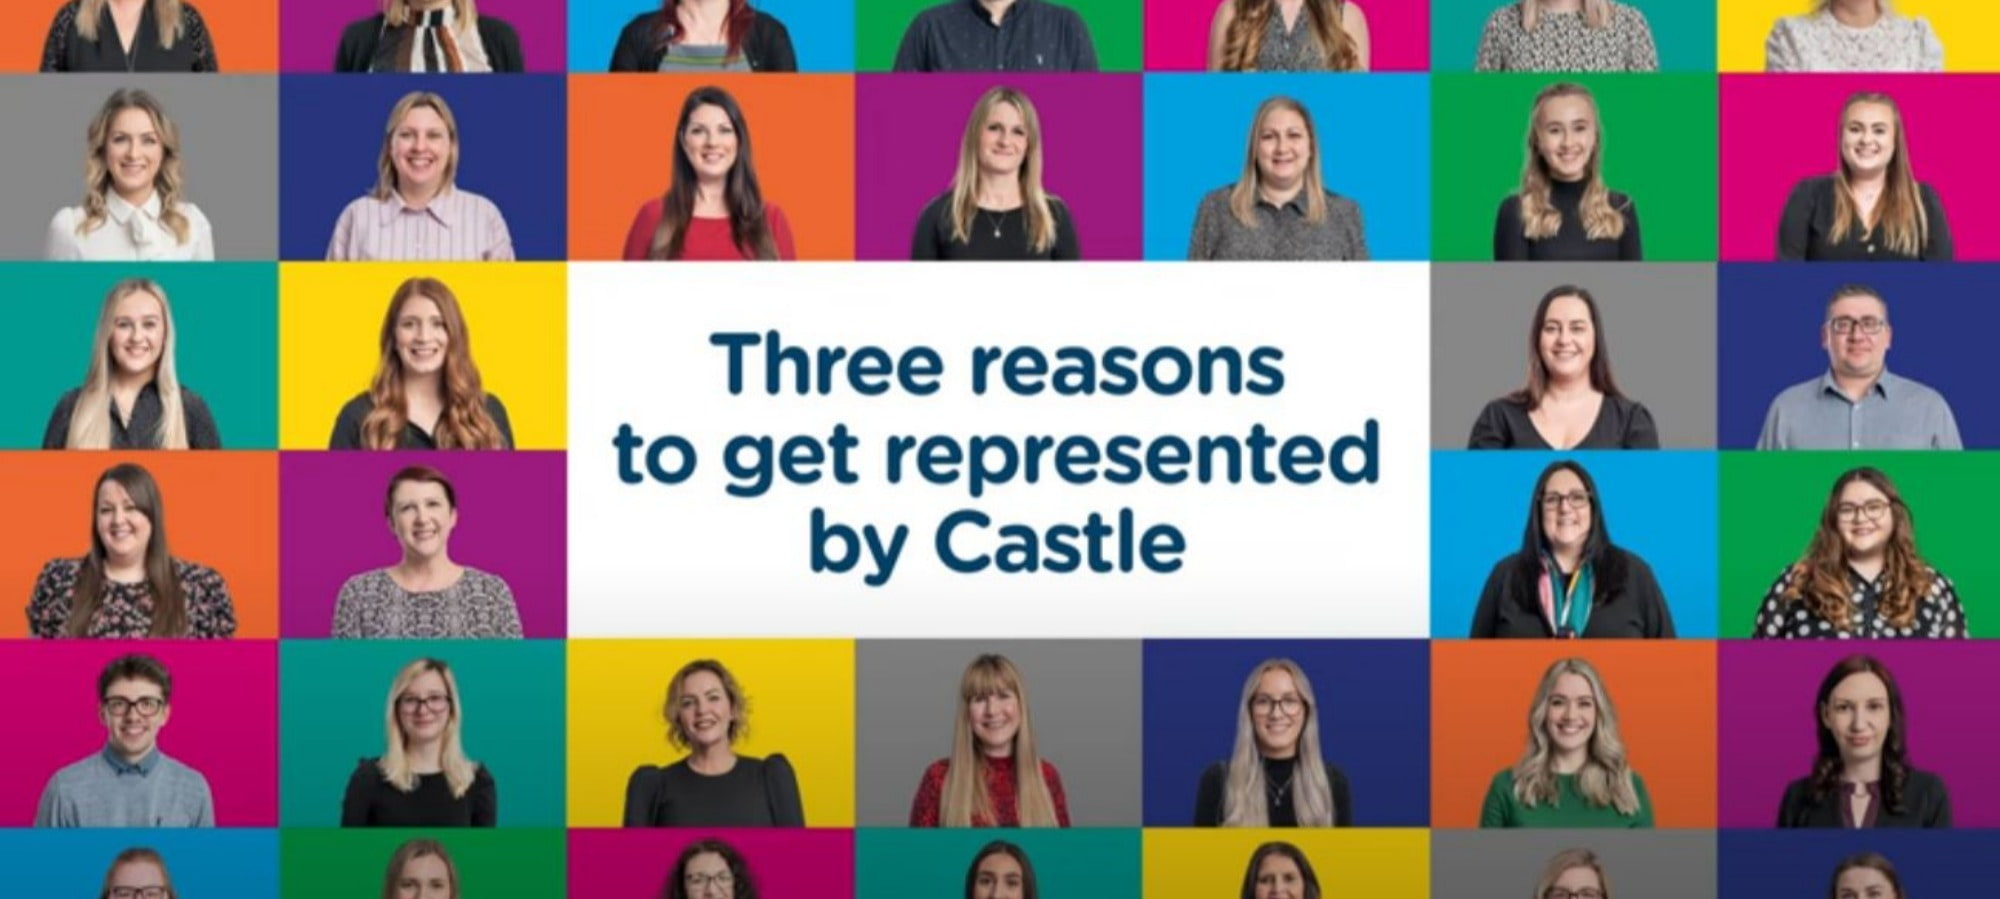 Life at Castle Employment Group